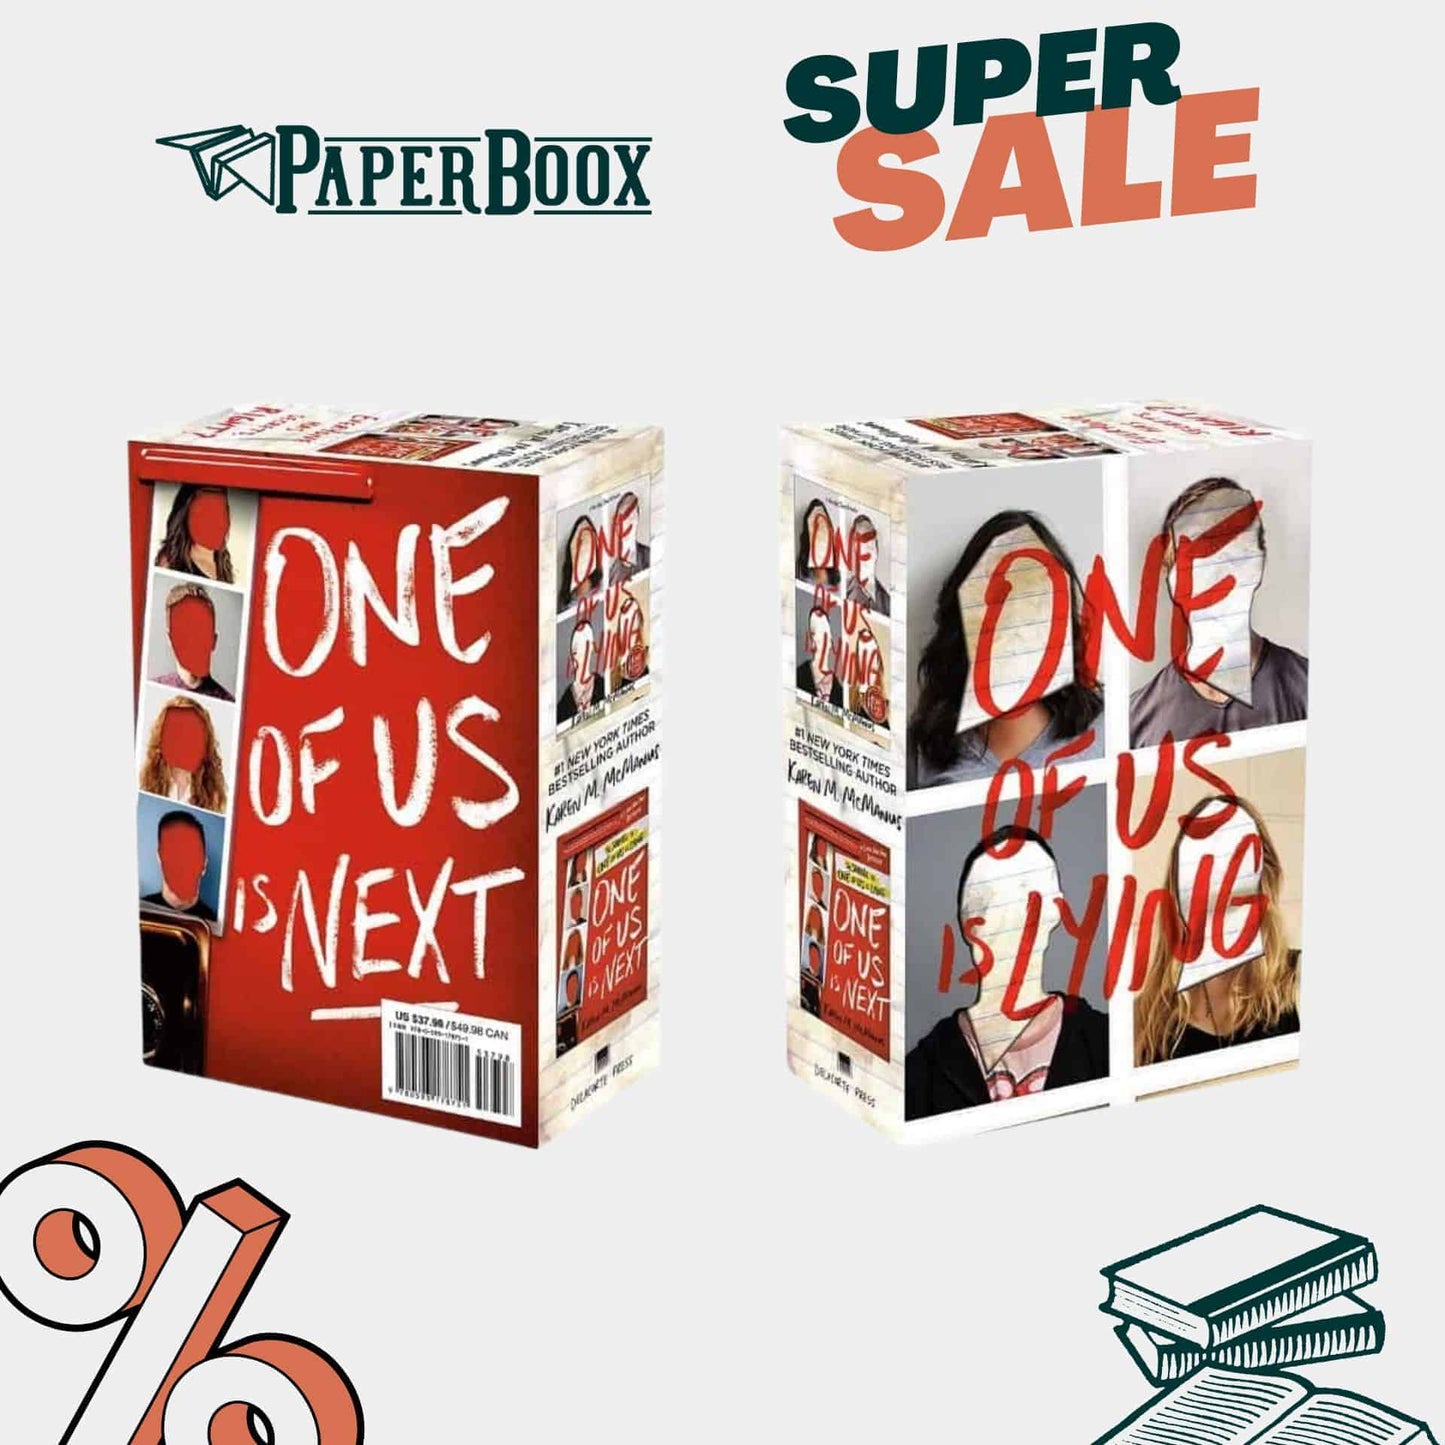 [SALE] Karen M. McManus 2-Book Box Set: One of Us Is Lying and One of Us Is Next (Hardcover)